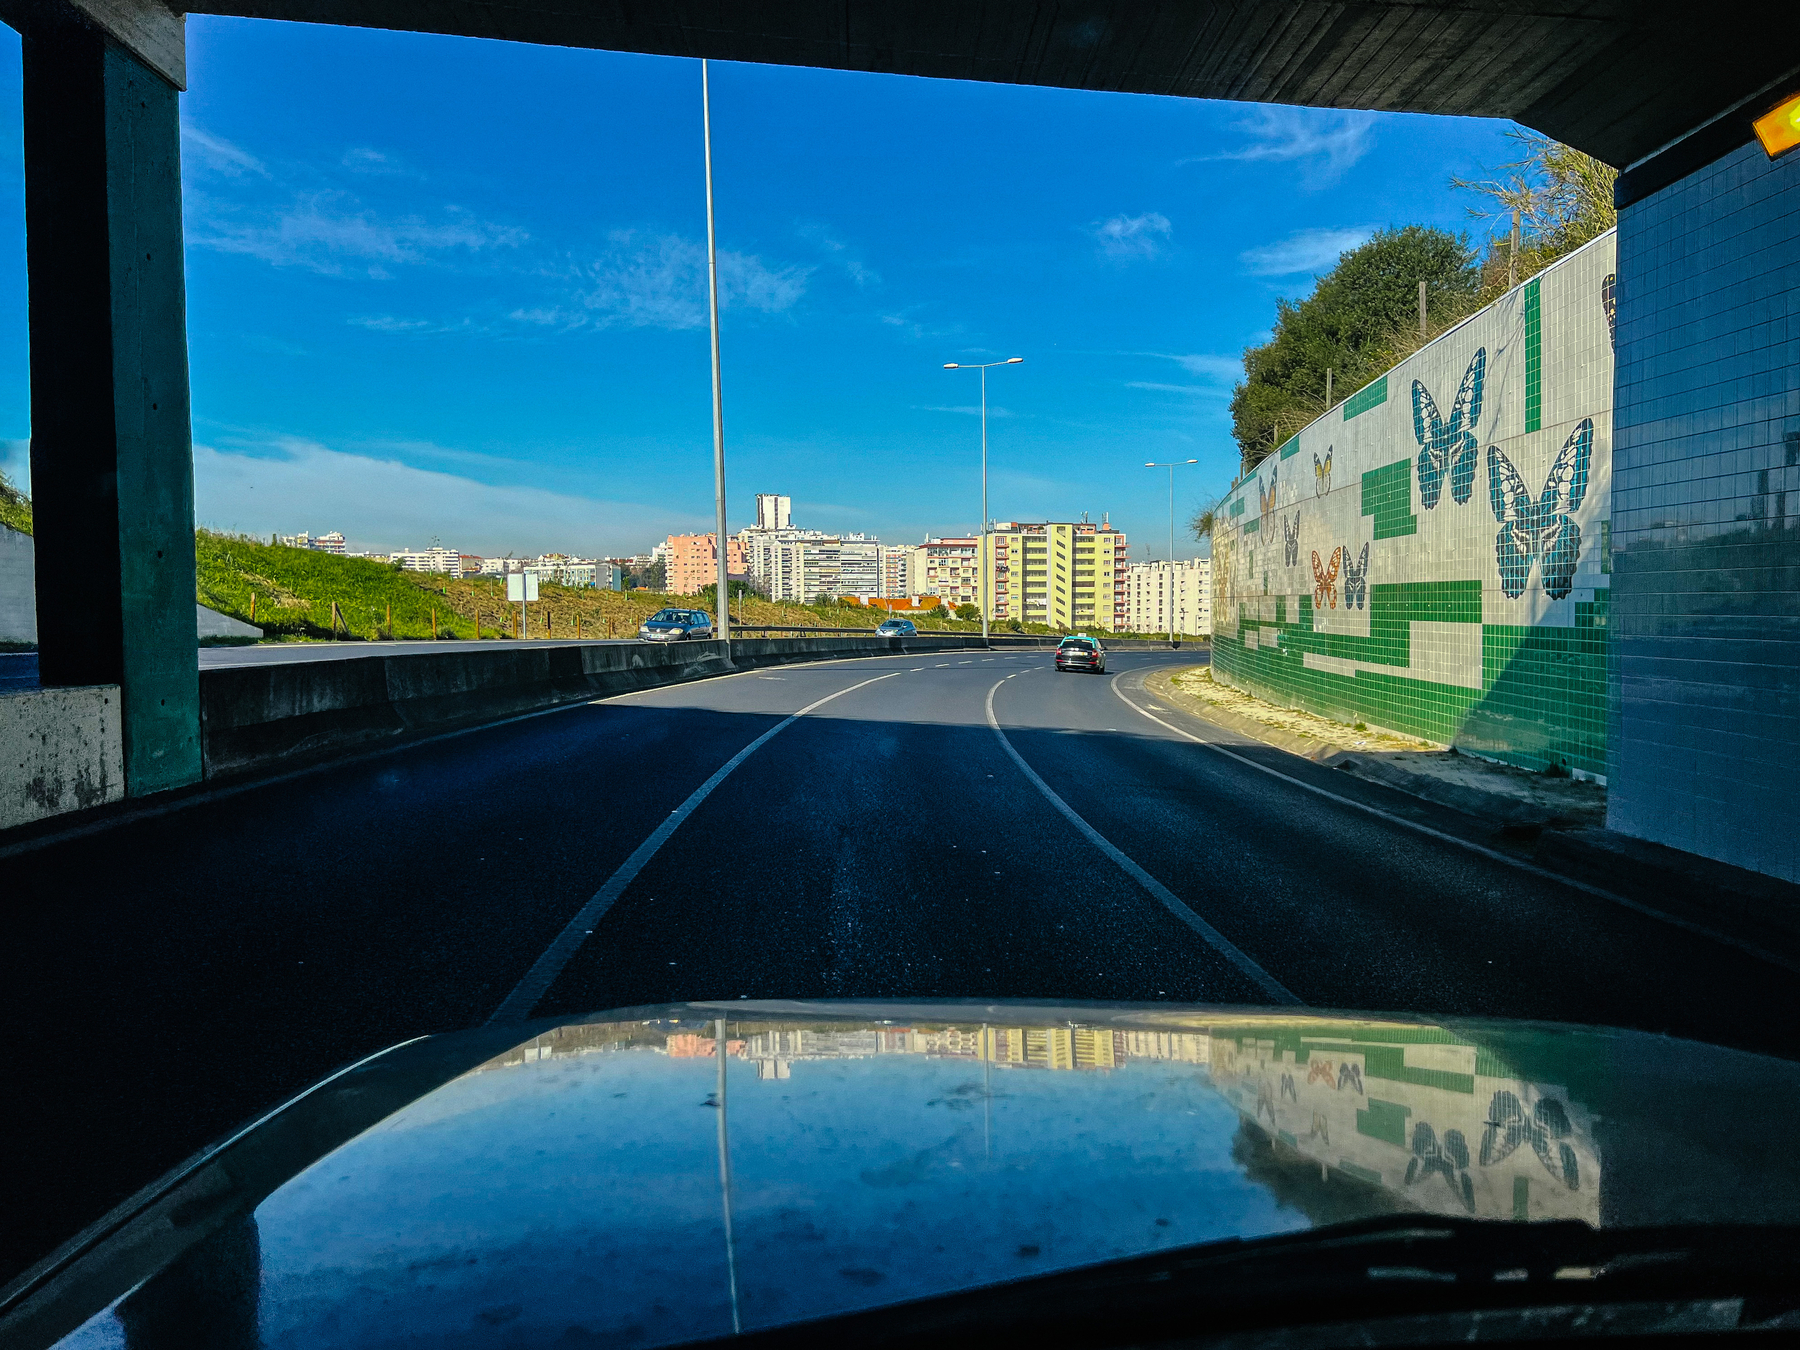 blue skies ahead on a road, buildings at the distance, and some butterflies on a tile panel on the right side 